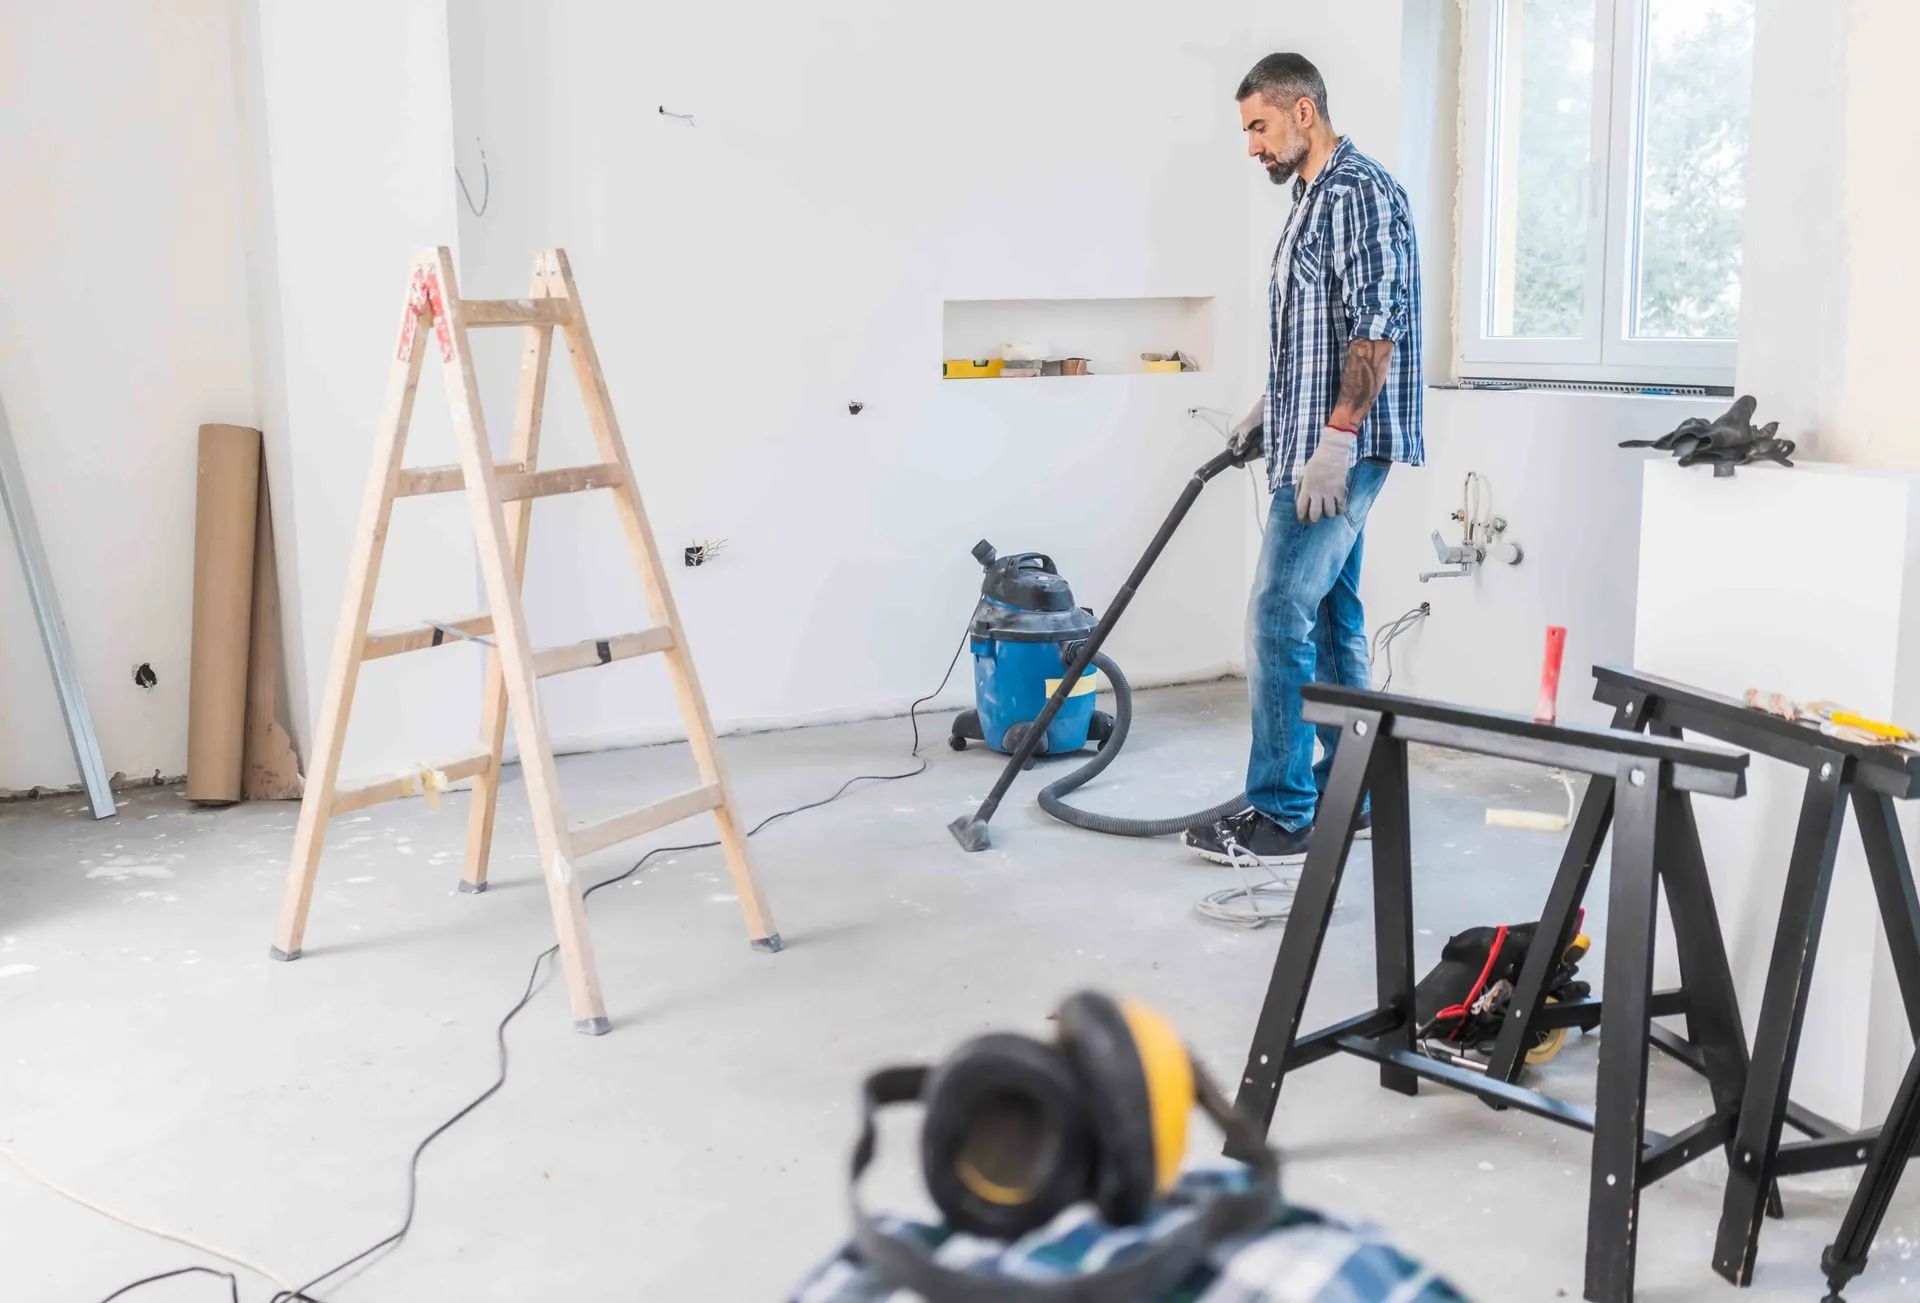 a man is using a vacuum cleaner in a room under construction